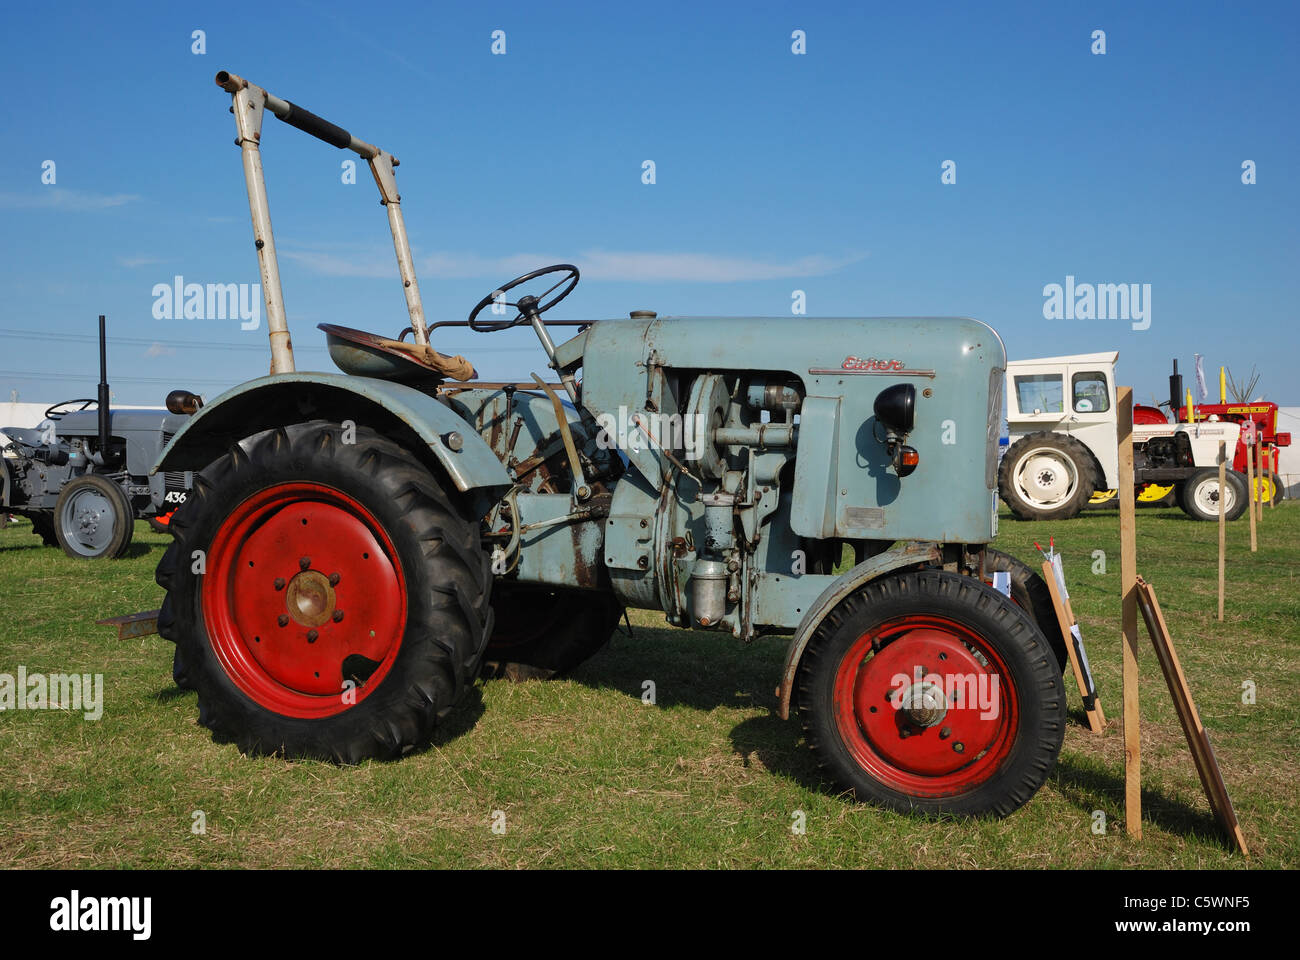 A 1959 Eicher ED 13 tractor. Lincolnshire, England. Stock Photo